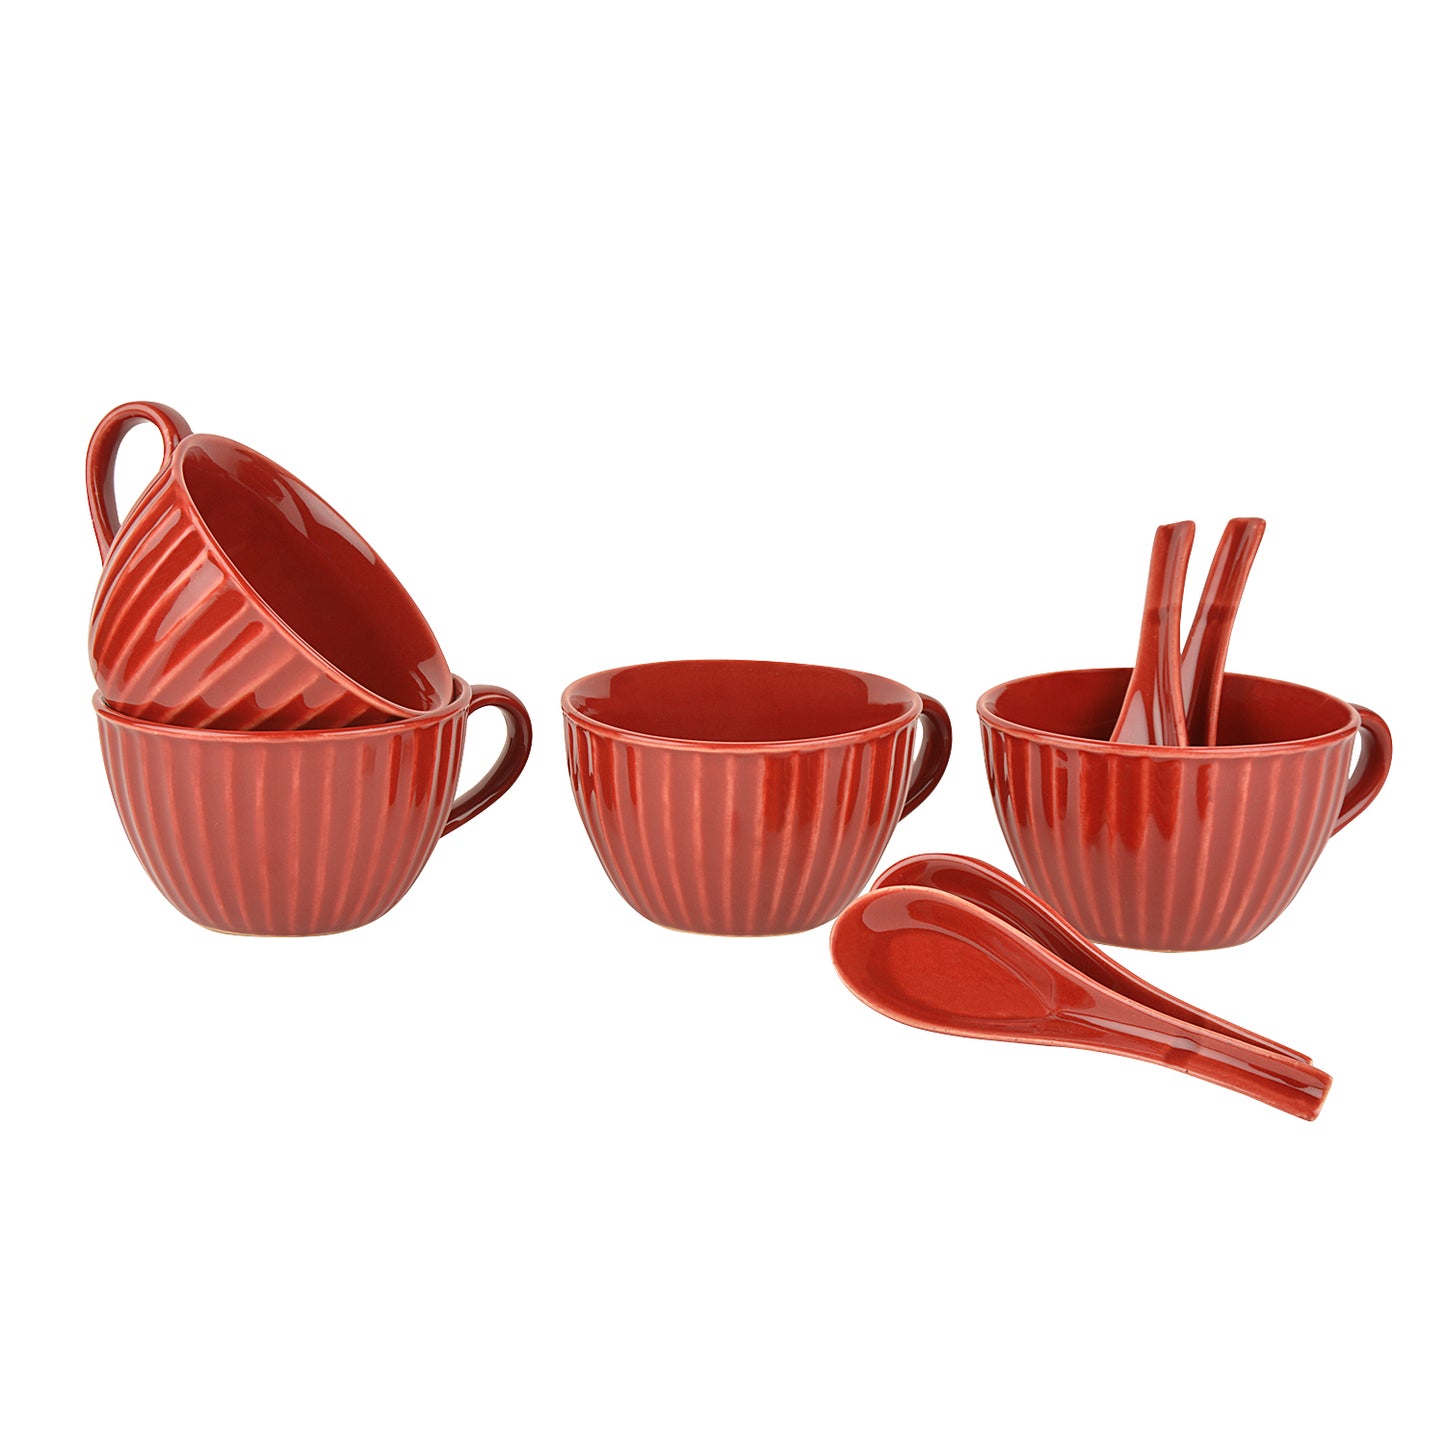 Studio Pottery Hand Glazed Ceramic Soup Cup with Spoon (350 ml each, Set of 4, Cherry Red)